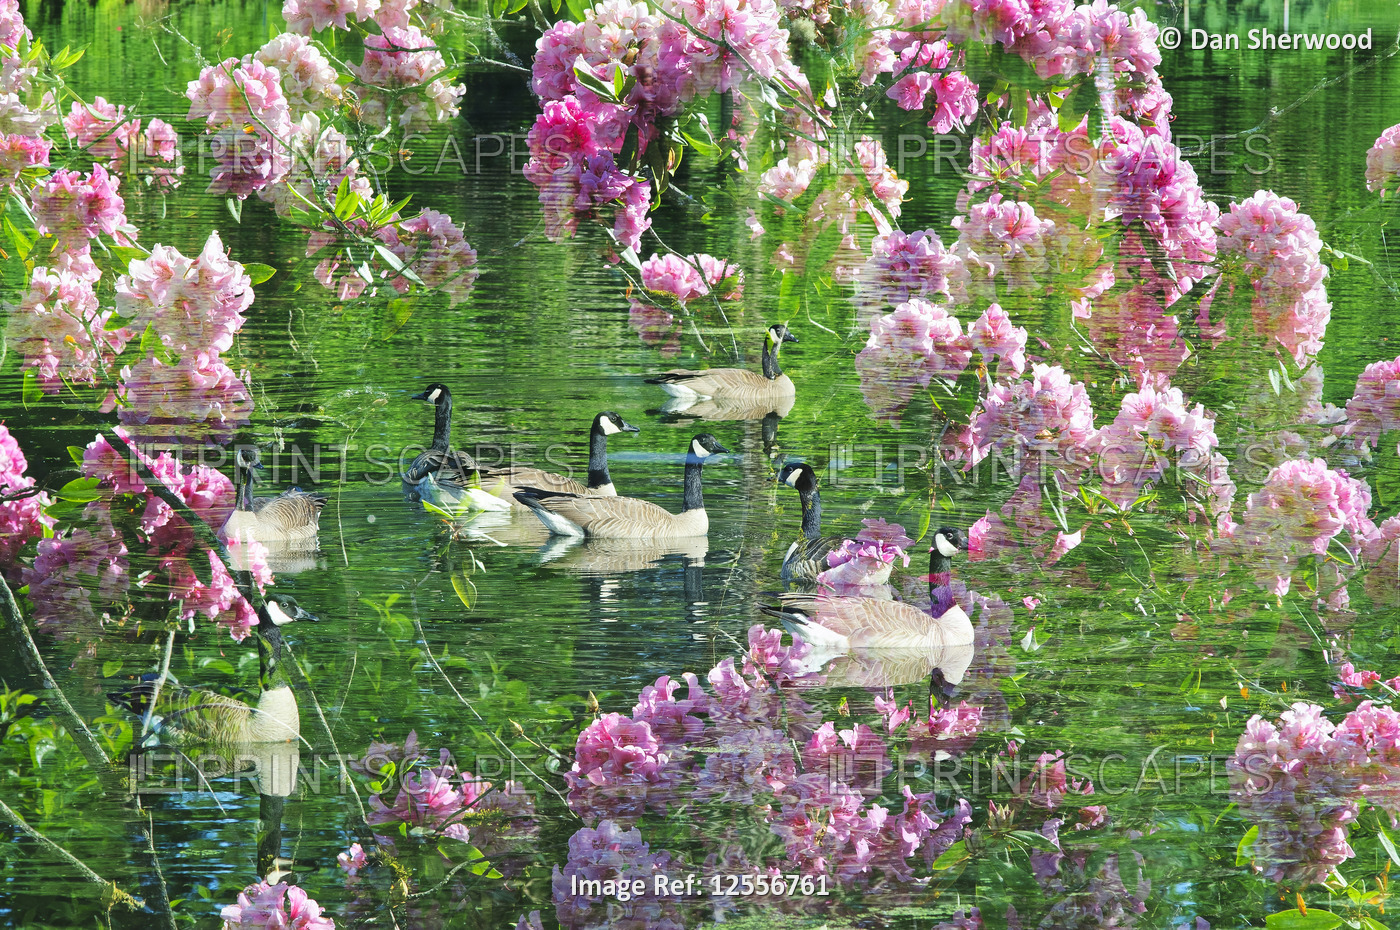 Multiple Exposure of Canadian Geese and Rhododendron Blossoms - Portland, Oregon